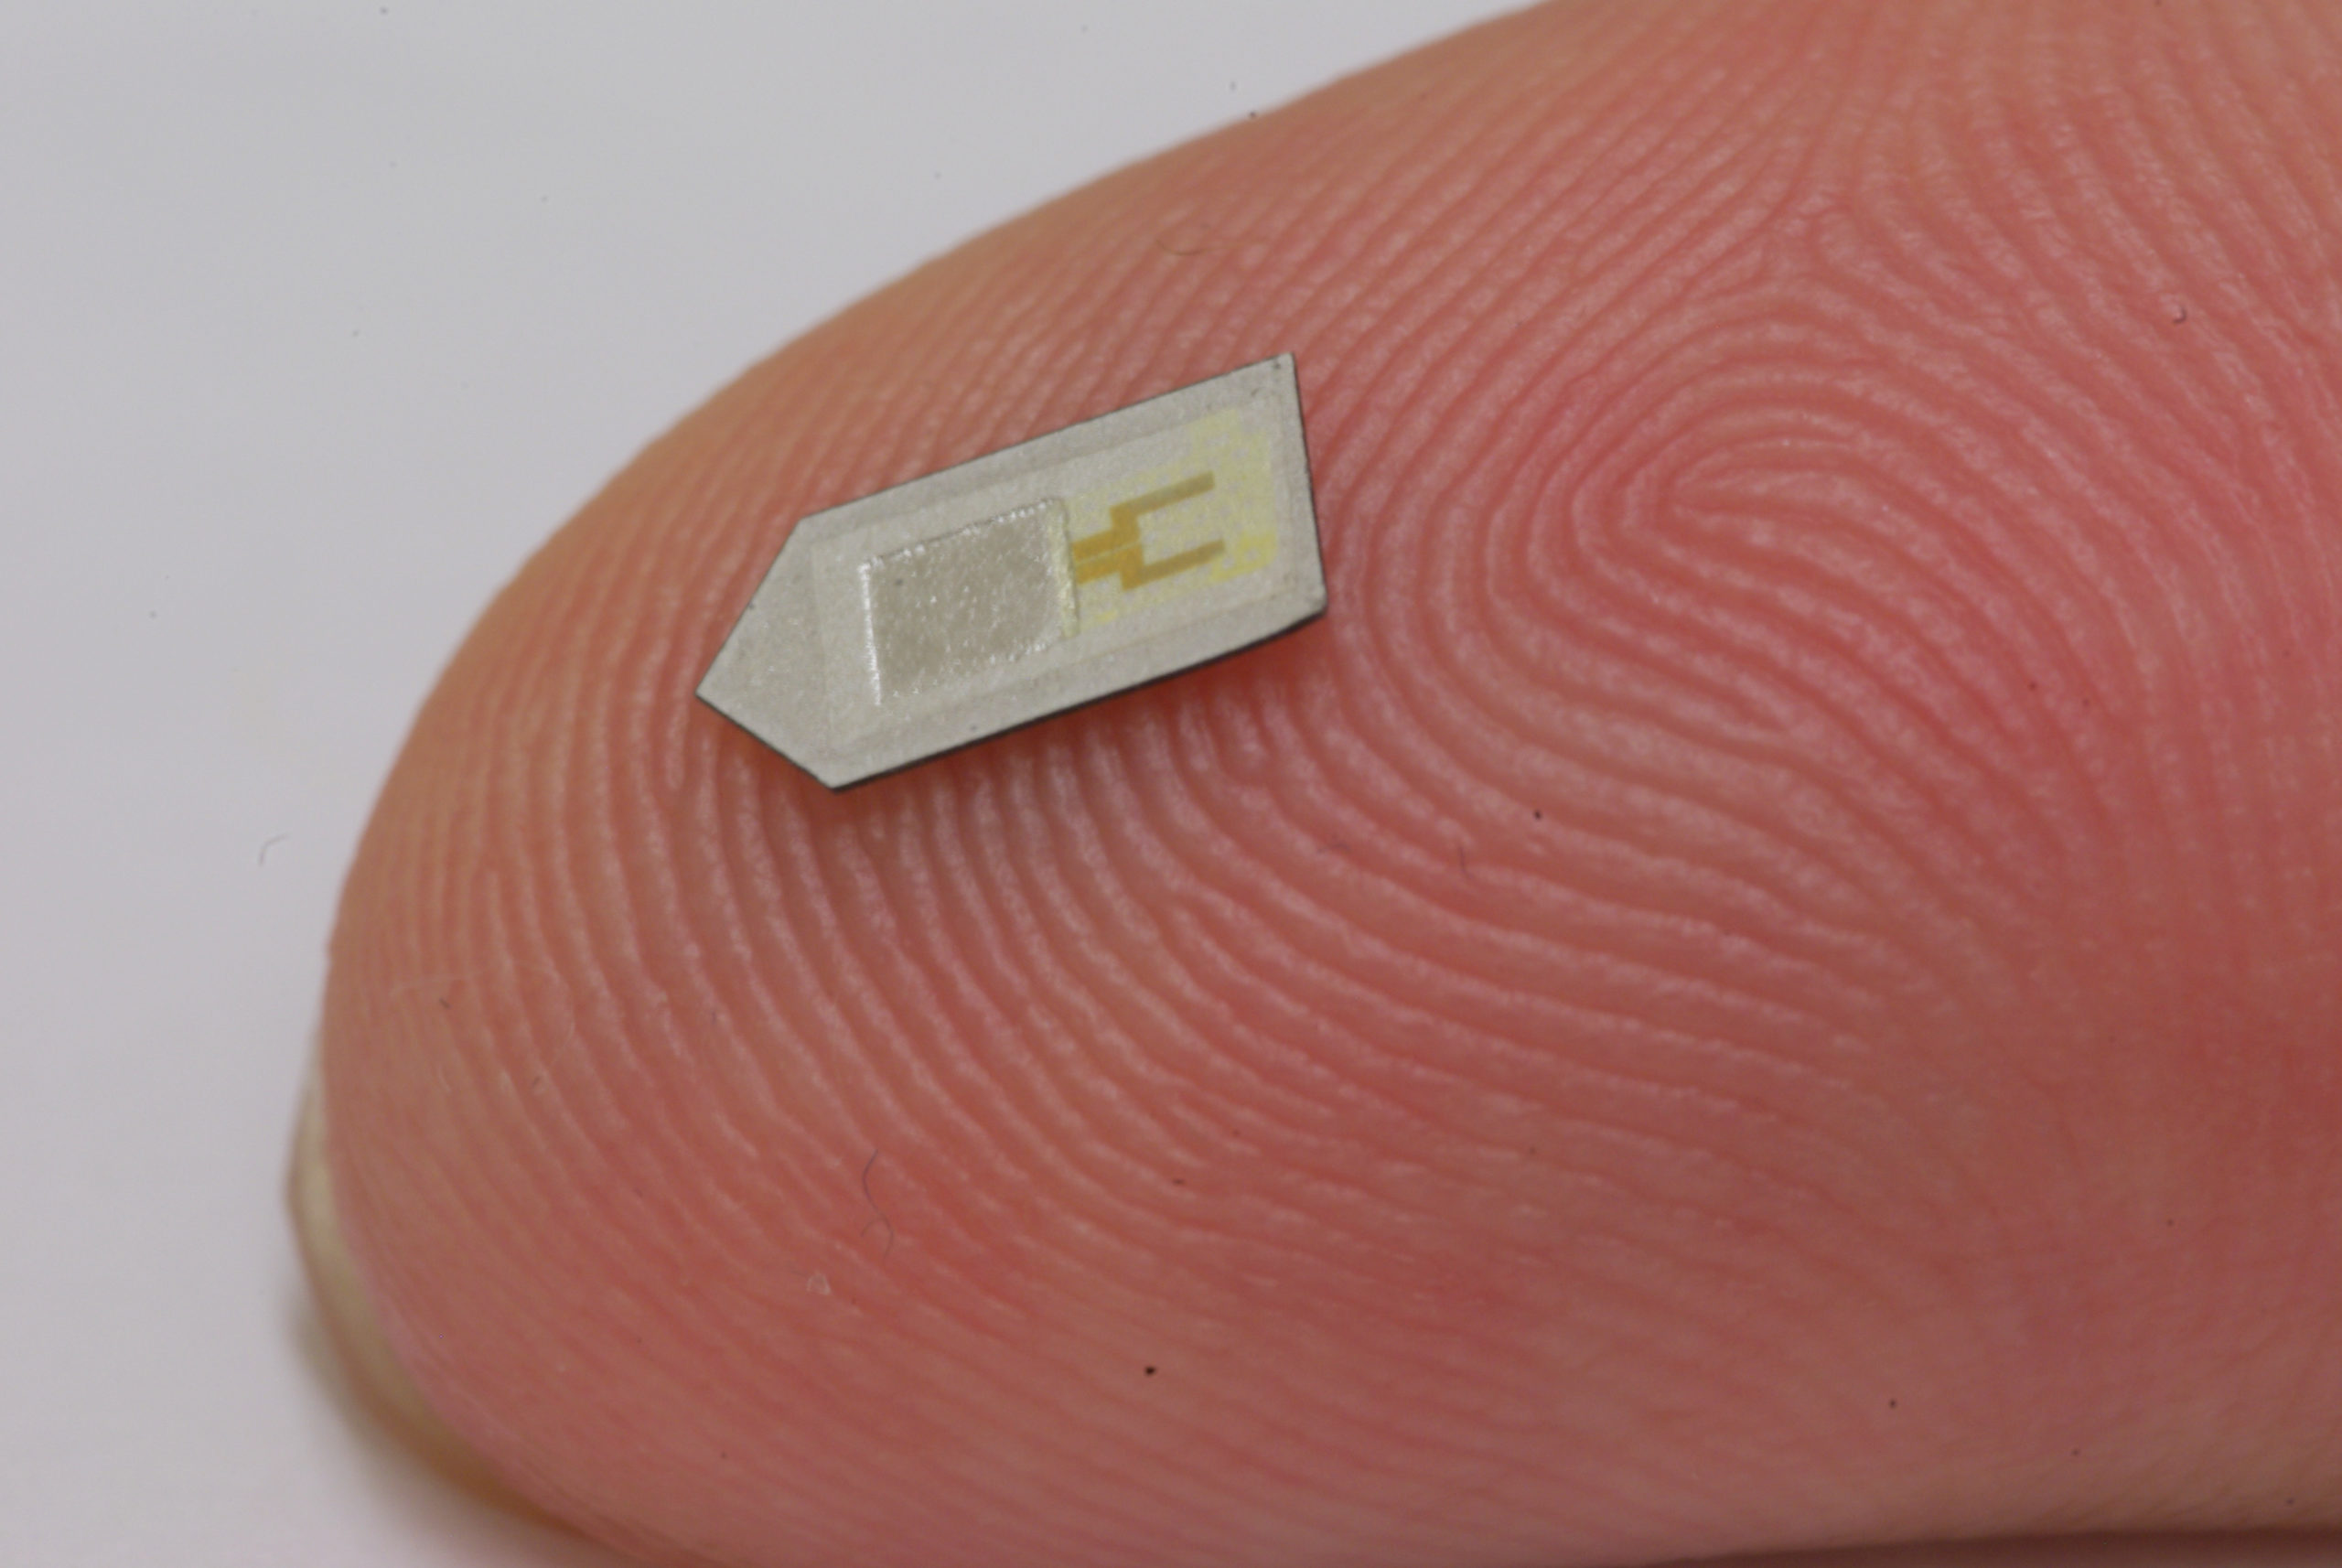 This Silicon Chip Will Monitor Your Brain And Dissolve In Your Body